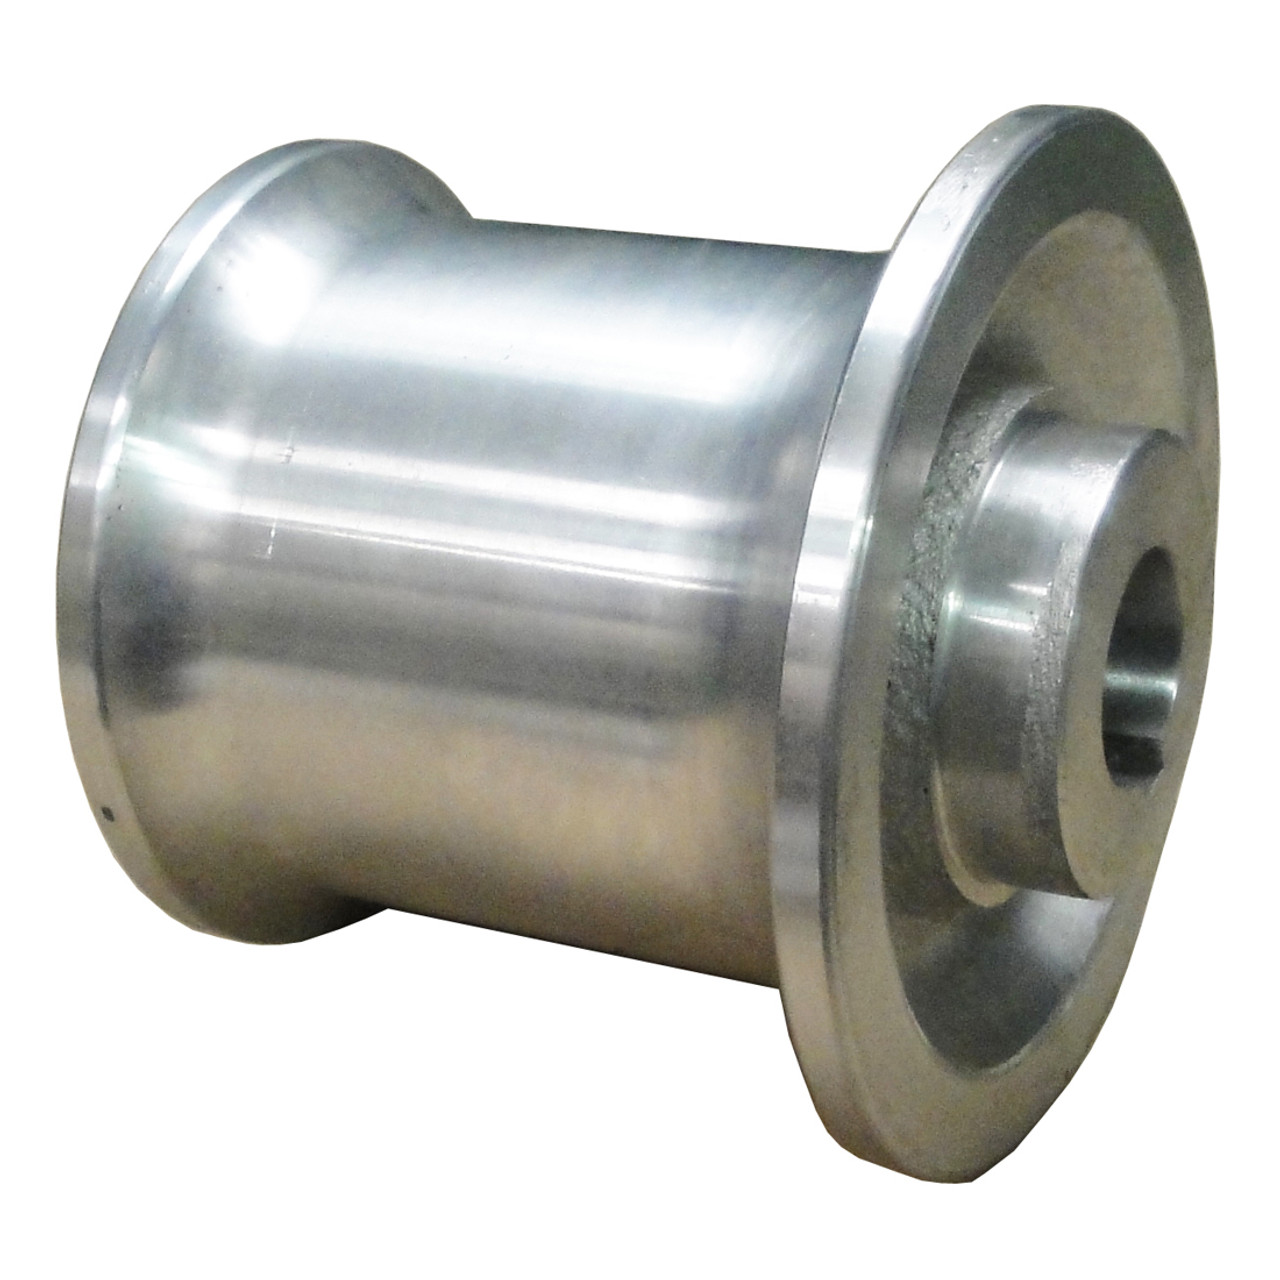 Kolstrand 4 Inch Aluminum capstan with 1-1/4 inch bore and 5/16 Inch keyway dimensional information